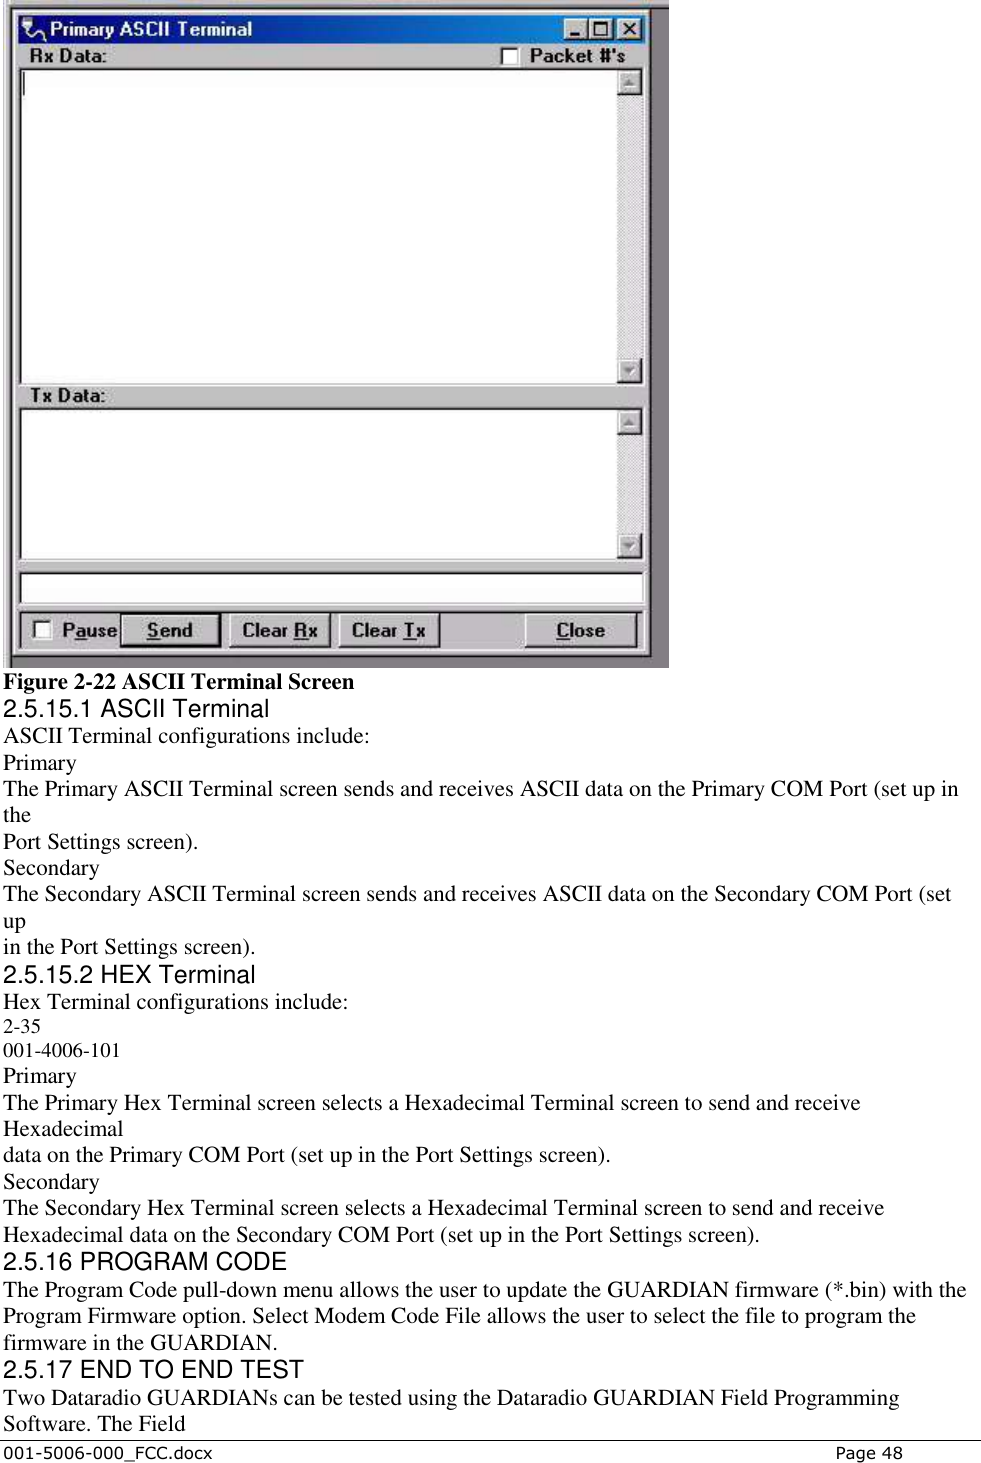  001-5006-000_FCC.docx    Page 48  Figure 2-22 ASCII Terminal Screen 2.5.15.1 ASCII Terminal ASCII Terminal configurations include: Primary The Primary ASCII Terminal screen sends and receives ASCII data on the Primary COM Port (set up in the Port Settings screen). Secondary The Secondary ASCII Terminal screen sends and receives ASCII data on the Secondary COM Port (set up in the Port Settings screen). 2.5.15.2 HEX Terminal Hex Terminal configurations include: 2-35 001-4006-101 Primary The Primary Hex Terminal screen selects a Hexadecimal Terminal screen to send and receive Hexadecimal data on the Primary COM Port (set up in the Port Settings screen). Secondary The Secondary Hex Terminal screen selects a Hexadecimal Terminal screen to send and receive Hexadecimal data on the Secondary COM Port (set up in the Port Settings screen). 2.5.16 PROGRAM CODE The Program Code pull-down menu allows the user to update the GUARDIAN firmware (*.bin) with the Program Firmware option. Select Modem Code File allows the user to select the file to program the firmware in the GUARDIAN. 2.5.17 END TO END TEST Two Dataradio GUARDIANs can be tested using the Dataradio GUARDIAN Field Programming Software. The Field 